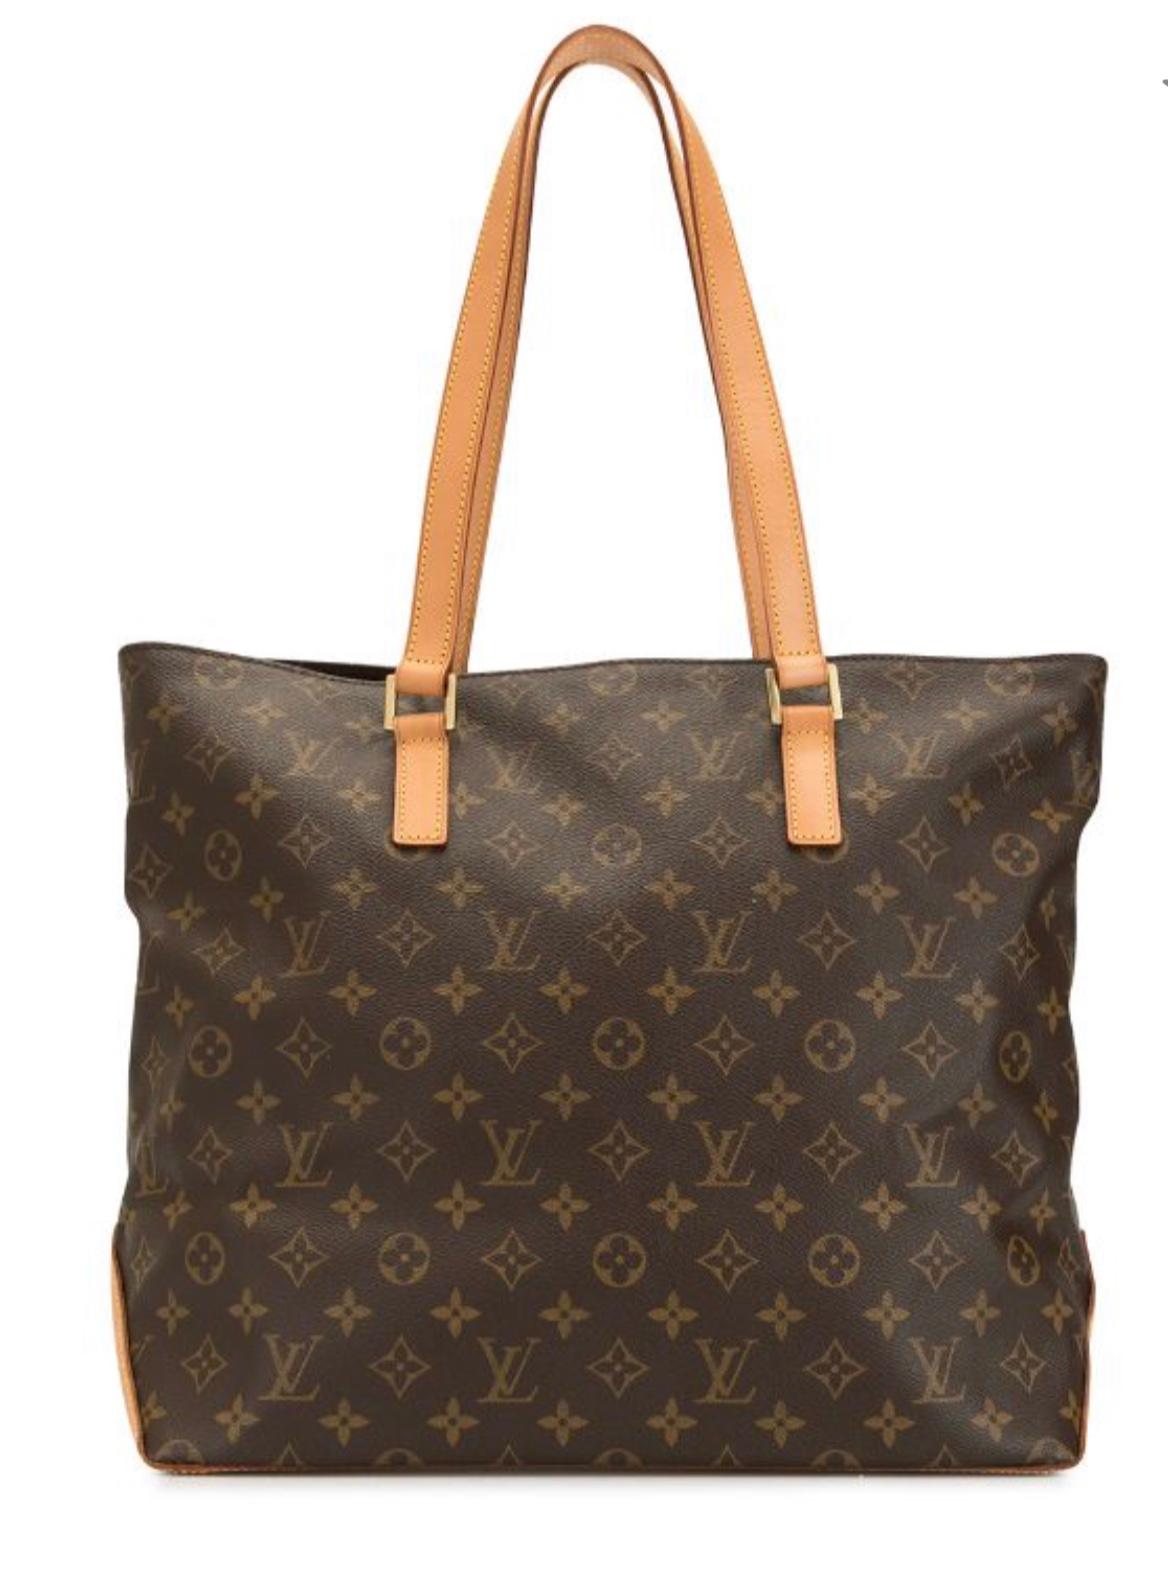 Louis Vuitton Monogram Canvas Cabas Mezzo Tote. This is a classic and discontinued LV tote that has always been a favorite. Features monogram canvas, natural cowhide straps and base, zip-top closure and textile lining with d-ring, slip-in pocket and